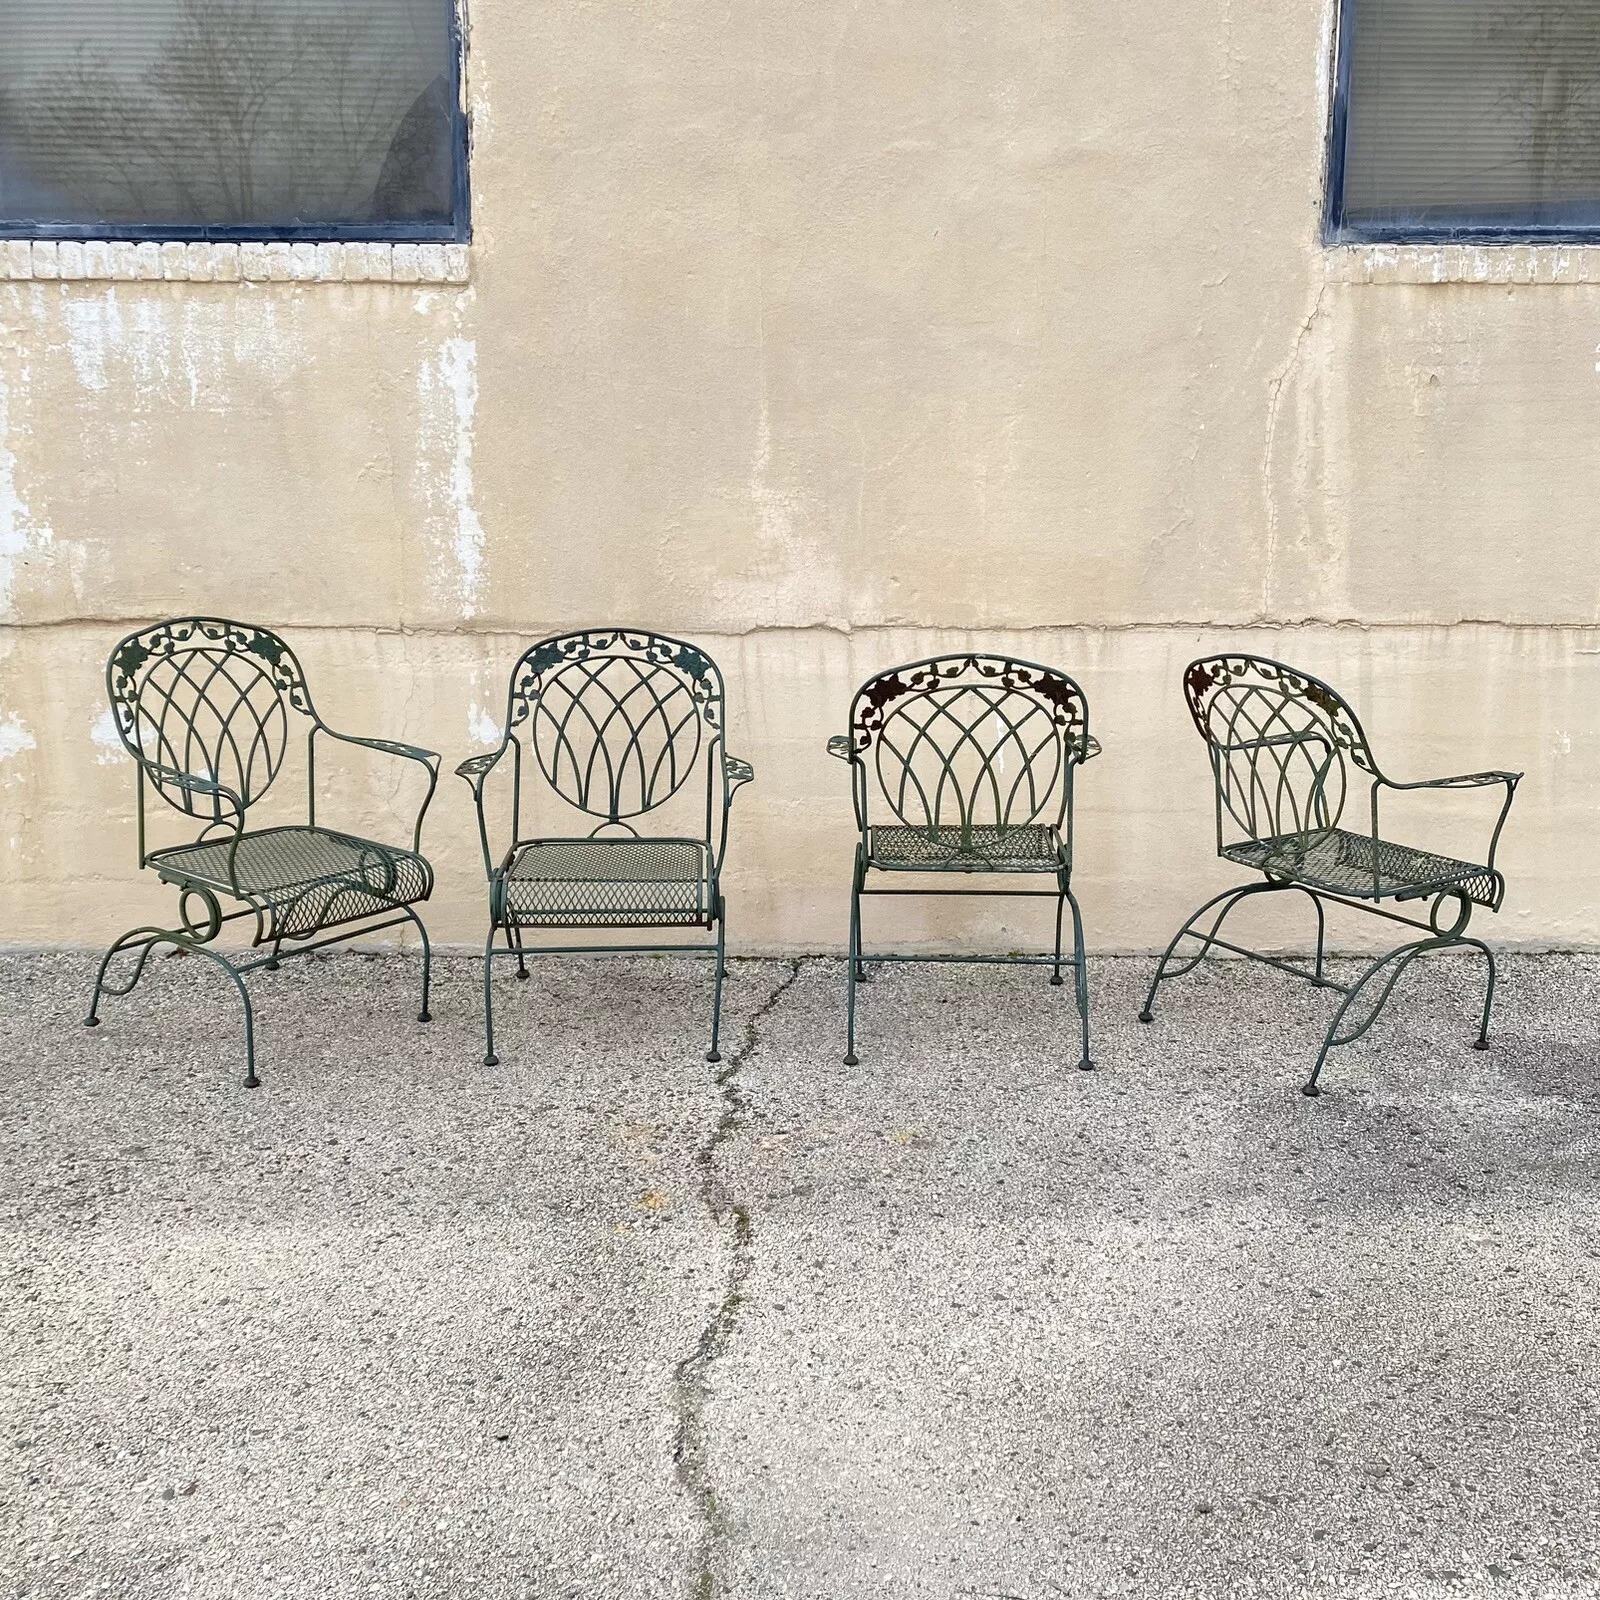 Vintage Wrought Iron Green Victorian Woodard Rose Style Garden Patio Springer Chairs - Set of 4. Circa Late 20th Century. Measurements: 37